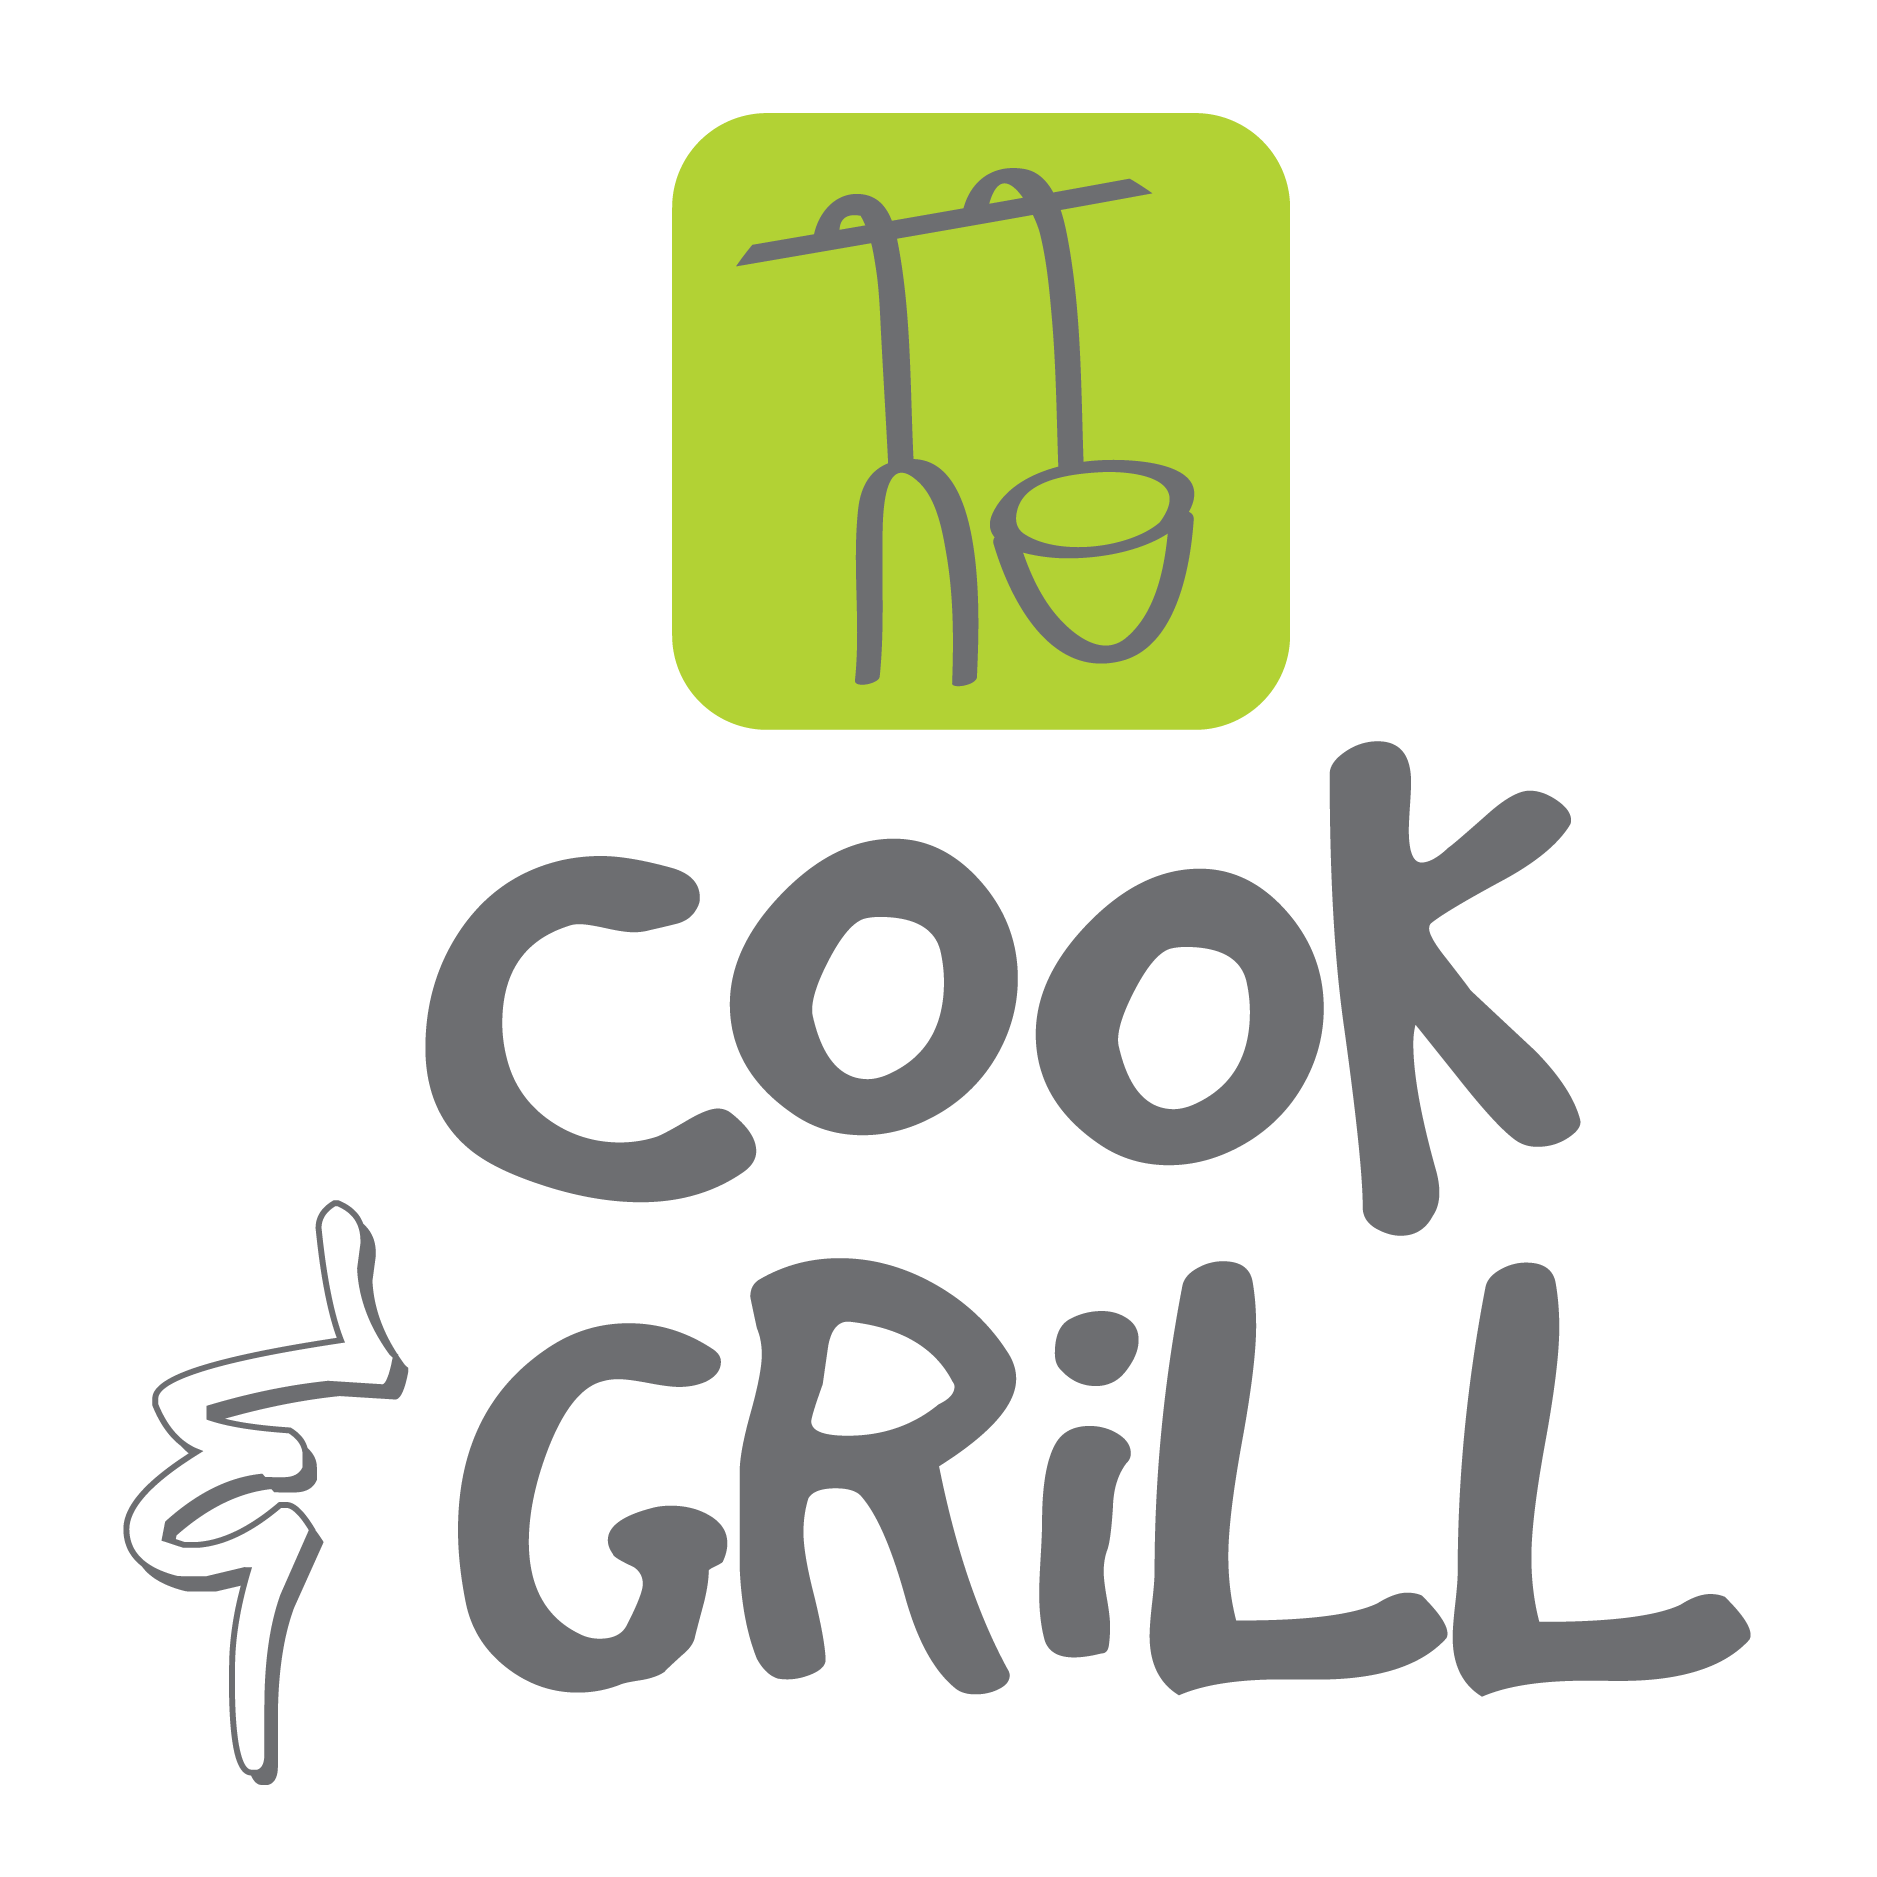 COOK & GRILL